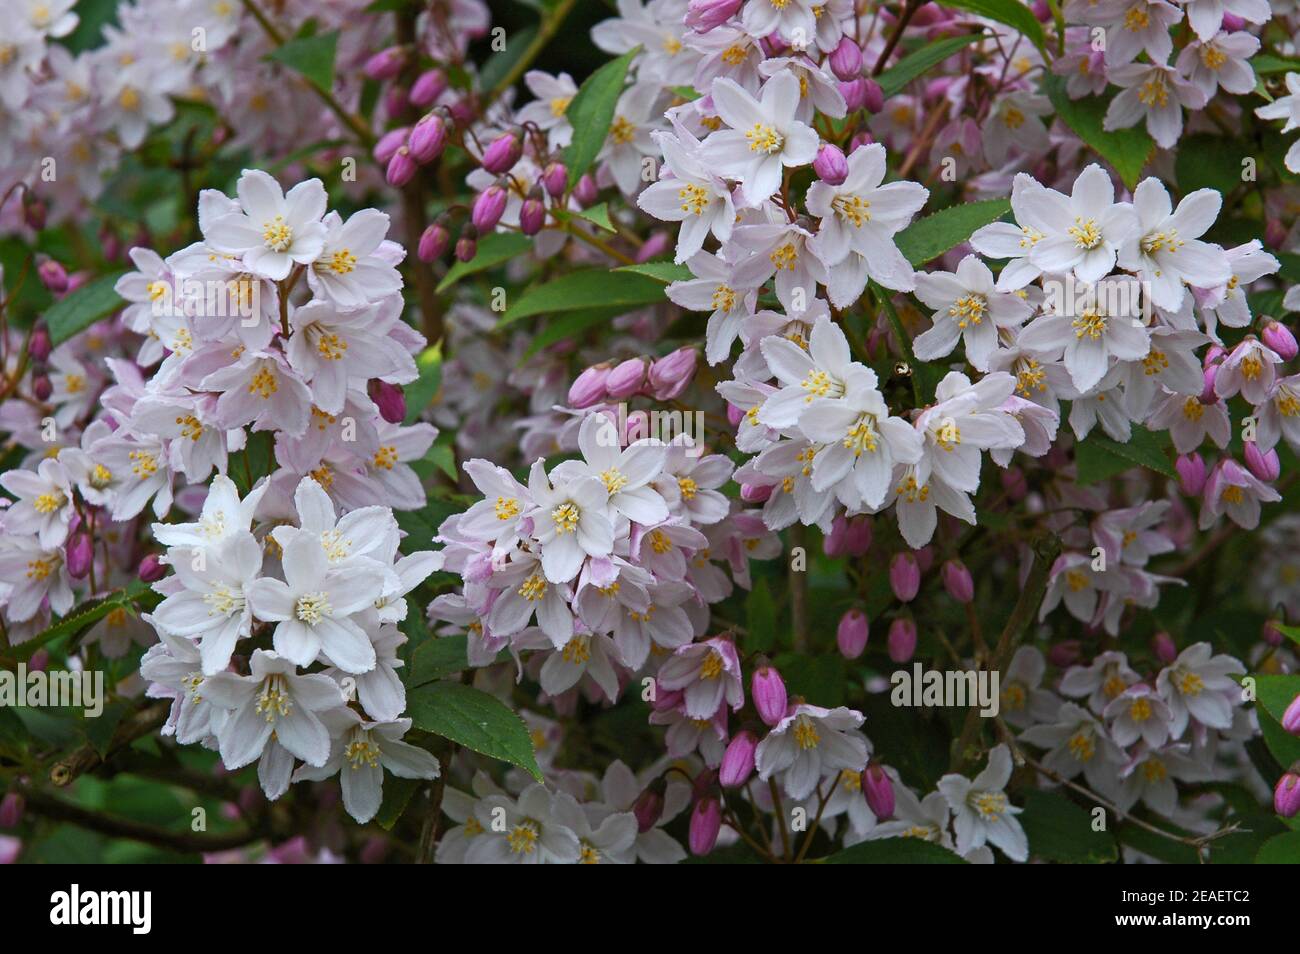 Deutzia scabra 'Plena'.  West Sussex Coastal Plain, 15th May 2006.  Deciduous shrub.  Grows in full sun or partial shade in any well drained soil. Stock Photo